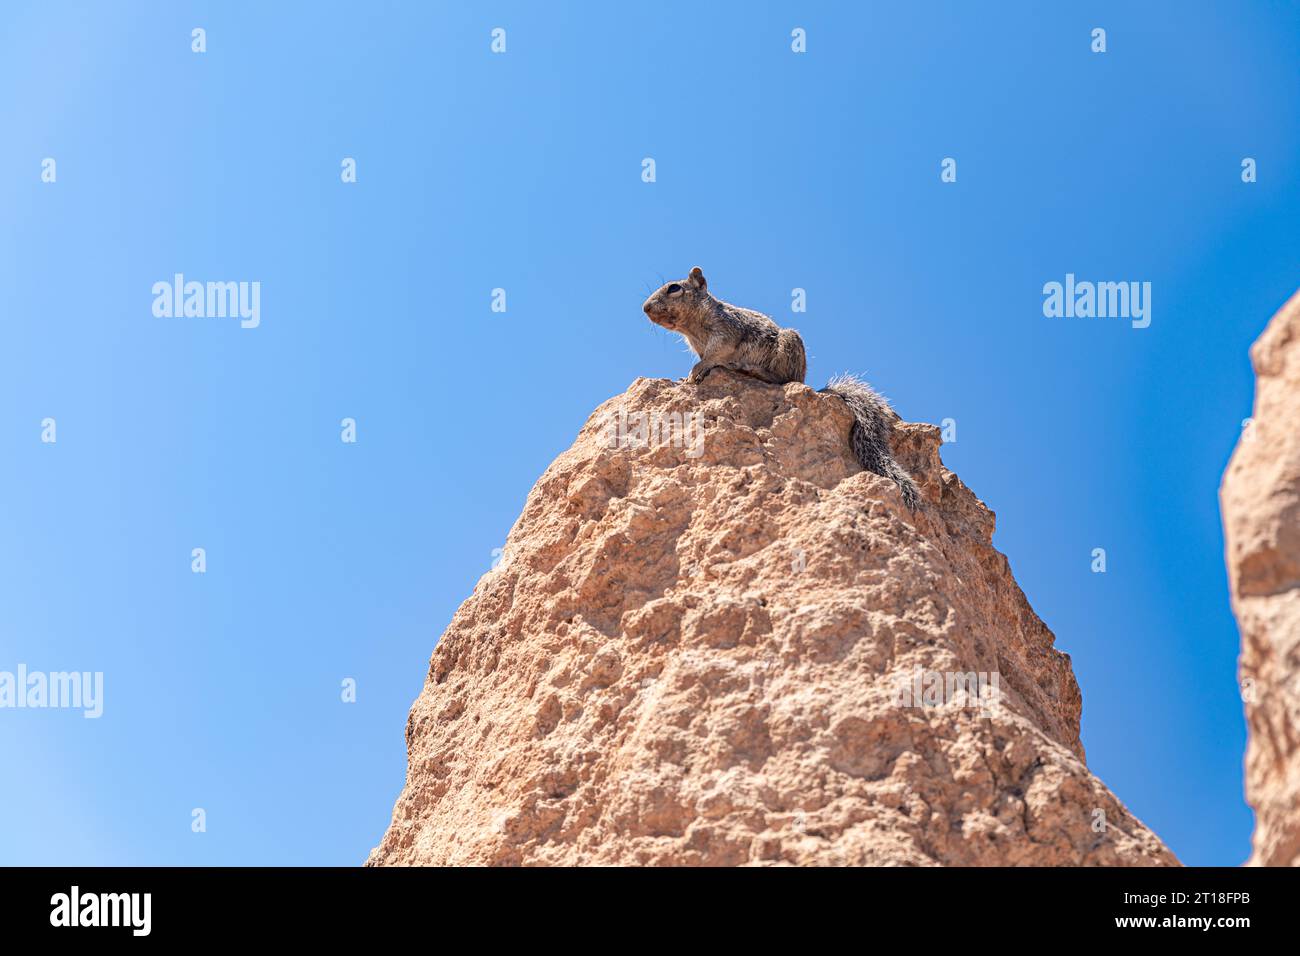 The Rock Squirrel stands on the top of the rock and observes the space around. Stock Photo